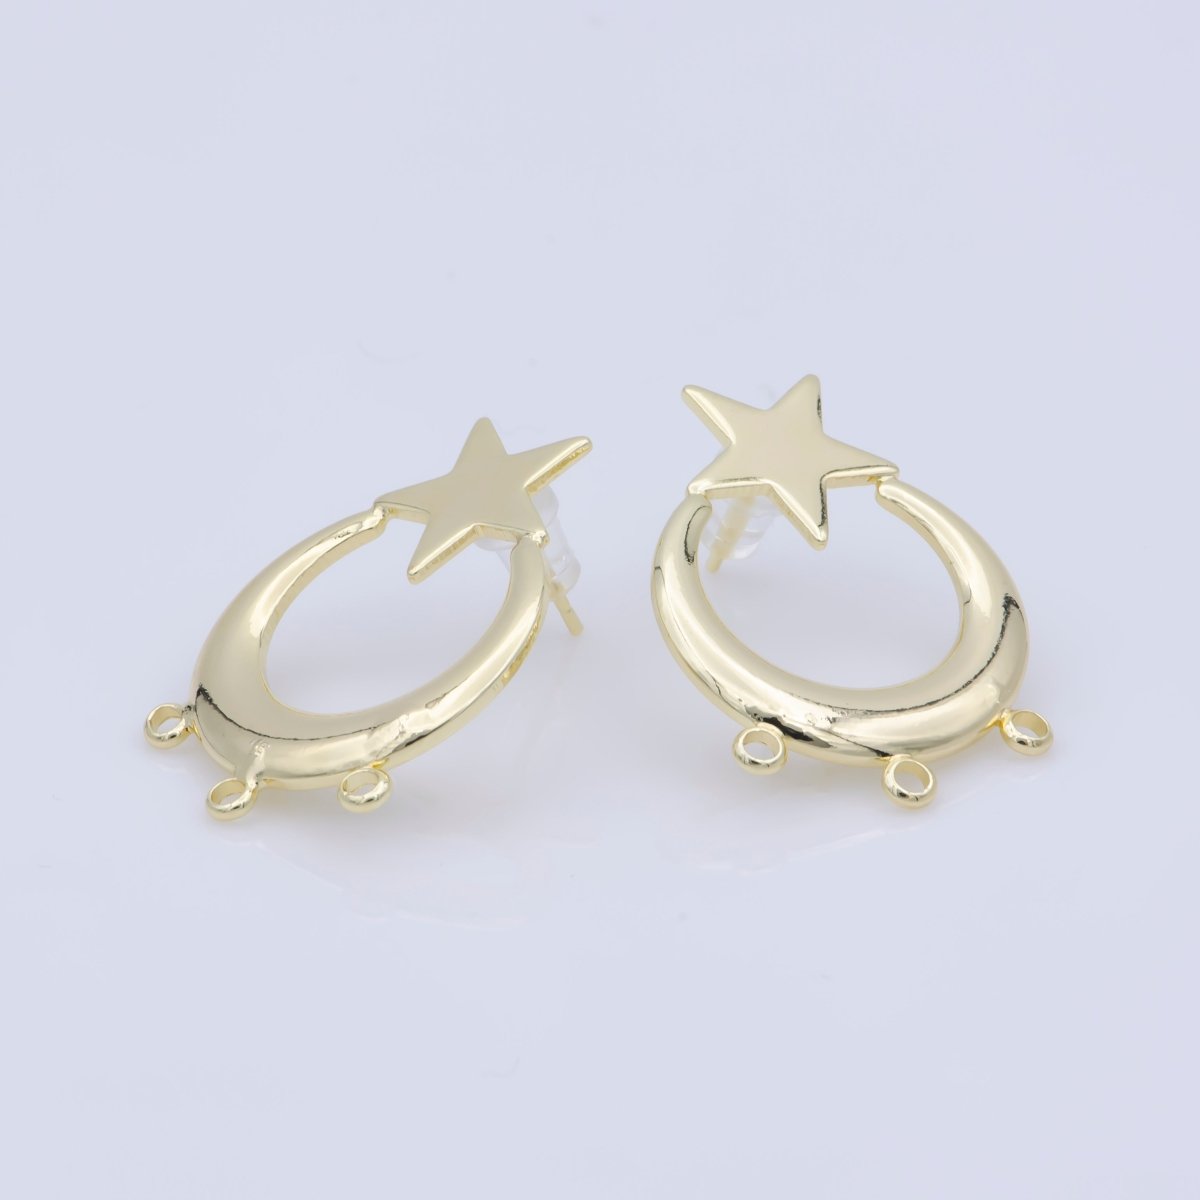 30mm Gold Star Hoop Earring w/ open link for Charm in 24K gold Filled, Lead and Nickel free, Star Stud earring supply Component K-266 - DLUXCA